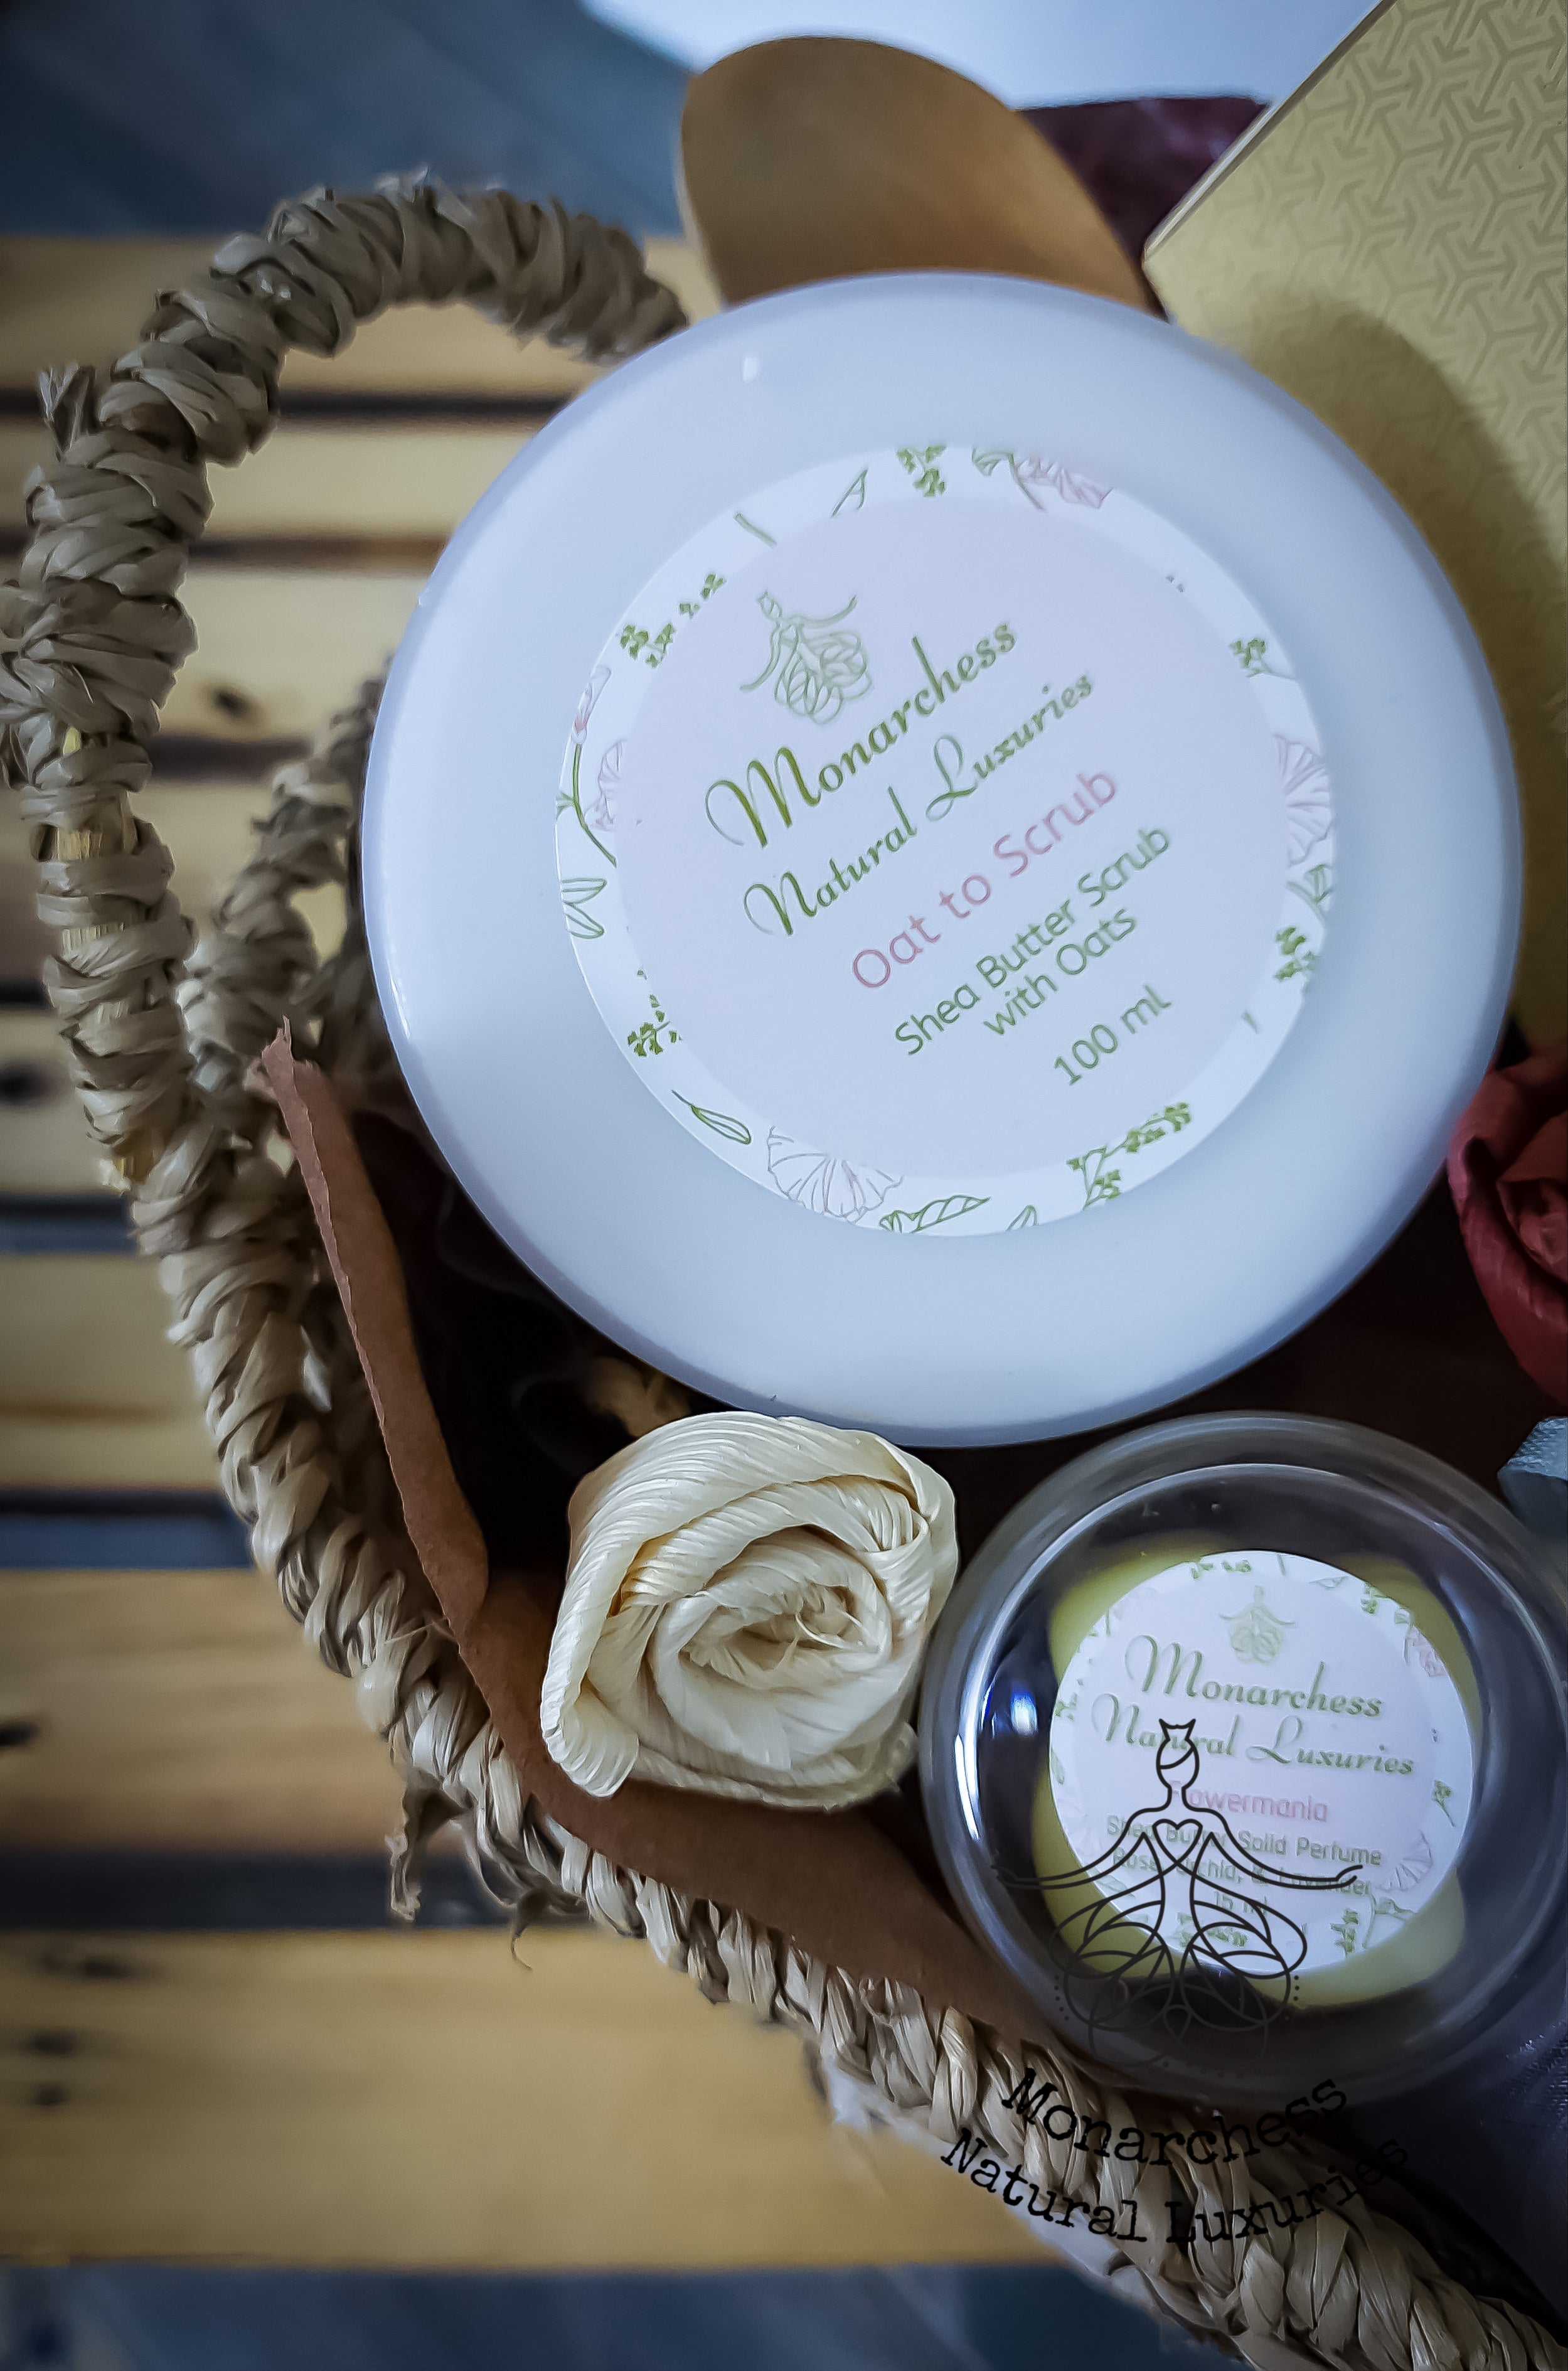 Gift Basket with two pieces of natural shea butter soap with different natural additives: rose oil, and matcha tea, solid perfume, body scrub, lip balm, and pure argan oil 60ml, in a beautiful gift basket. Monarchess Natural Luxuries skincare products. Monarchess, Amman, Jordan